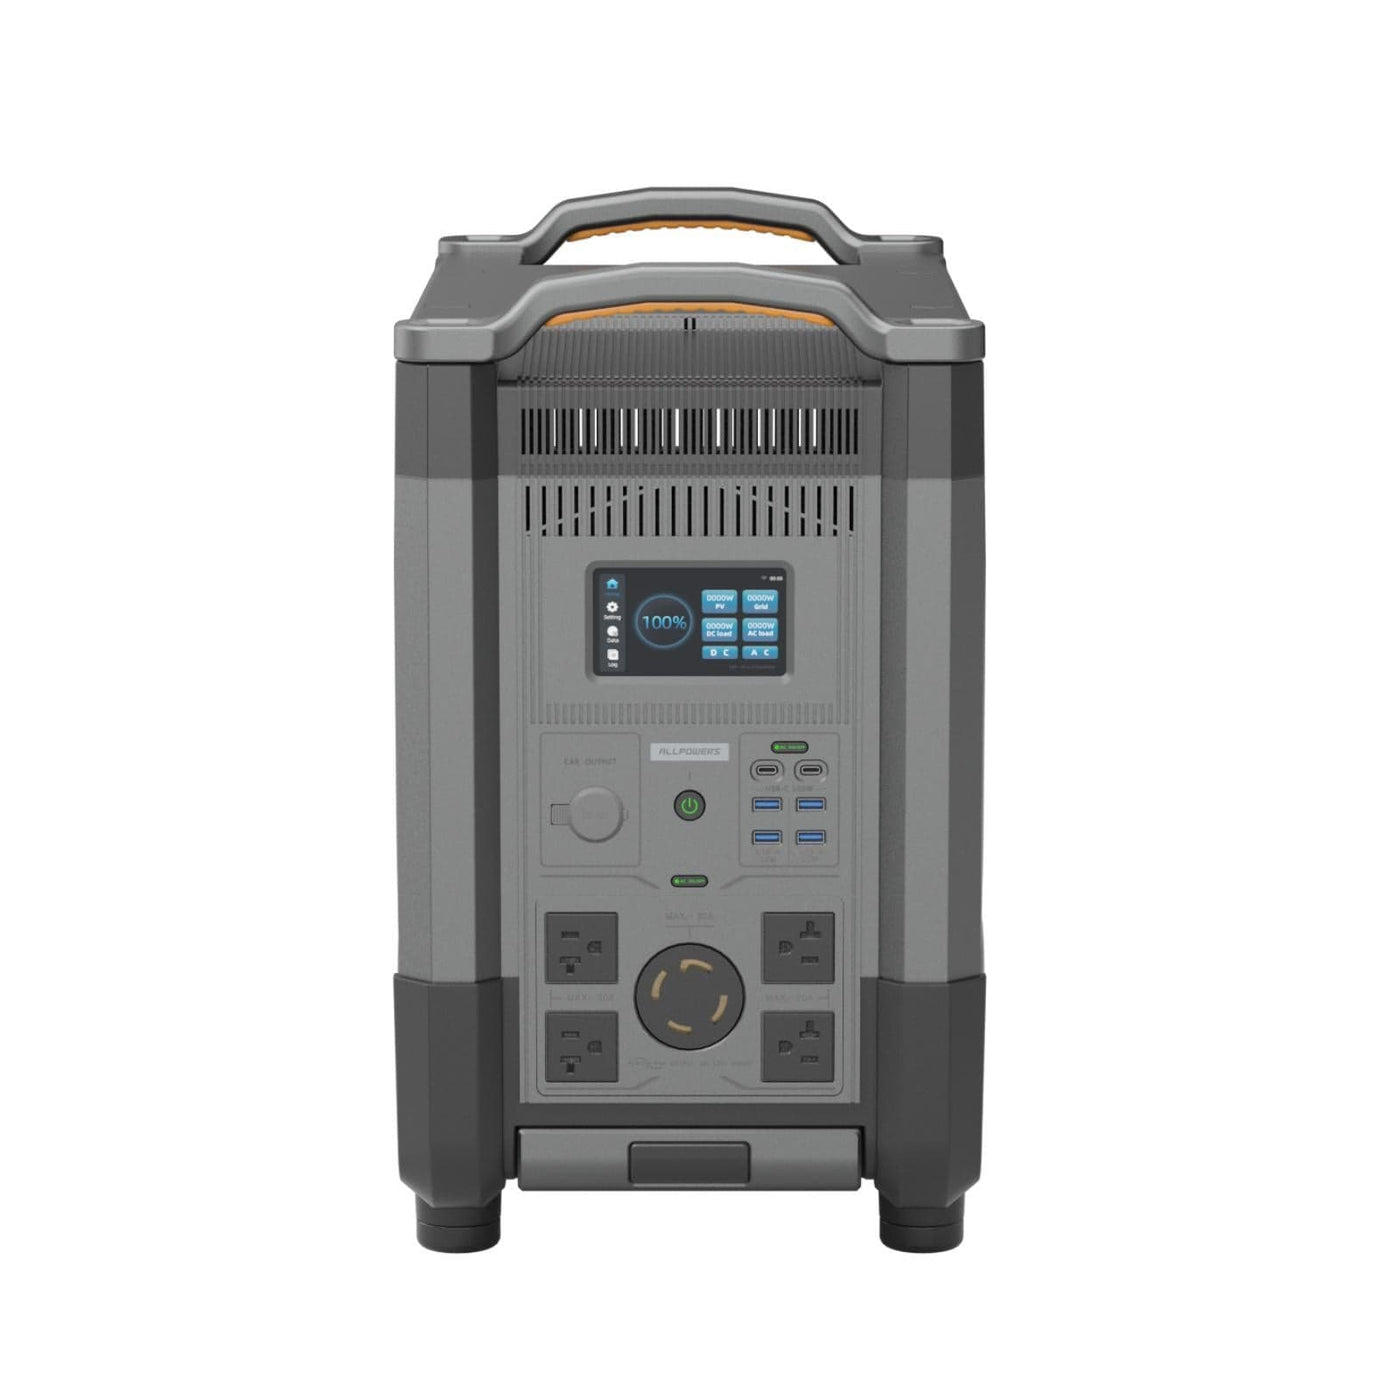 ALLPOWERS R4000 ポータブル電源(3600Wh/3600W) – ALLPOWERS公式サイト